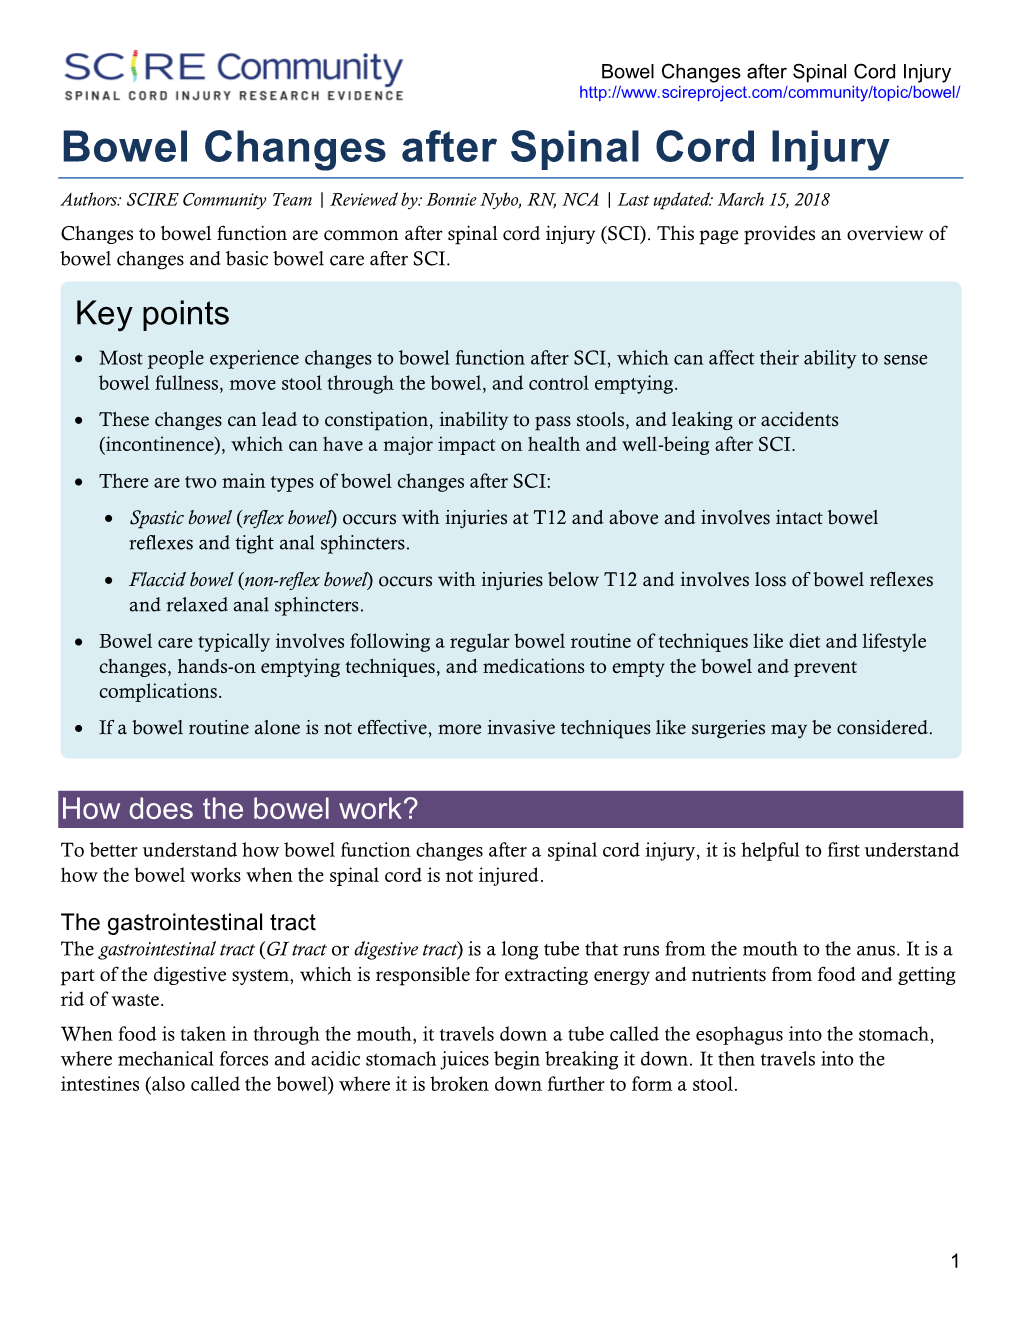 Bowel Changes After Spinal Cord Injury Bowel Changes After Spinal Cord Injury